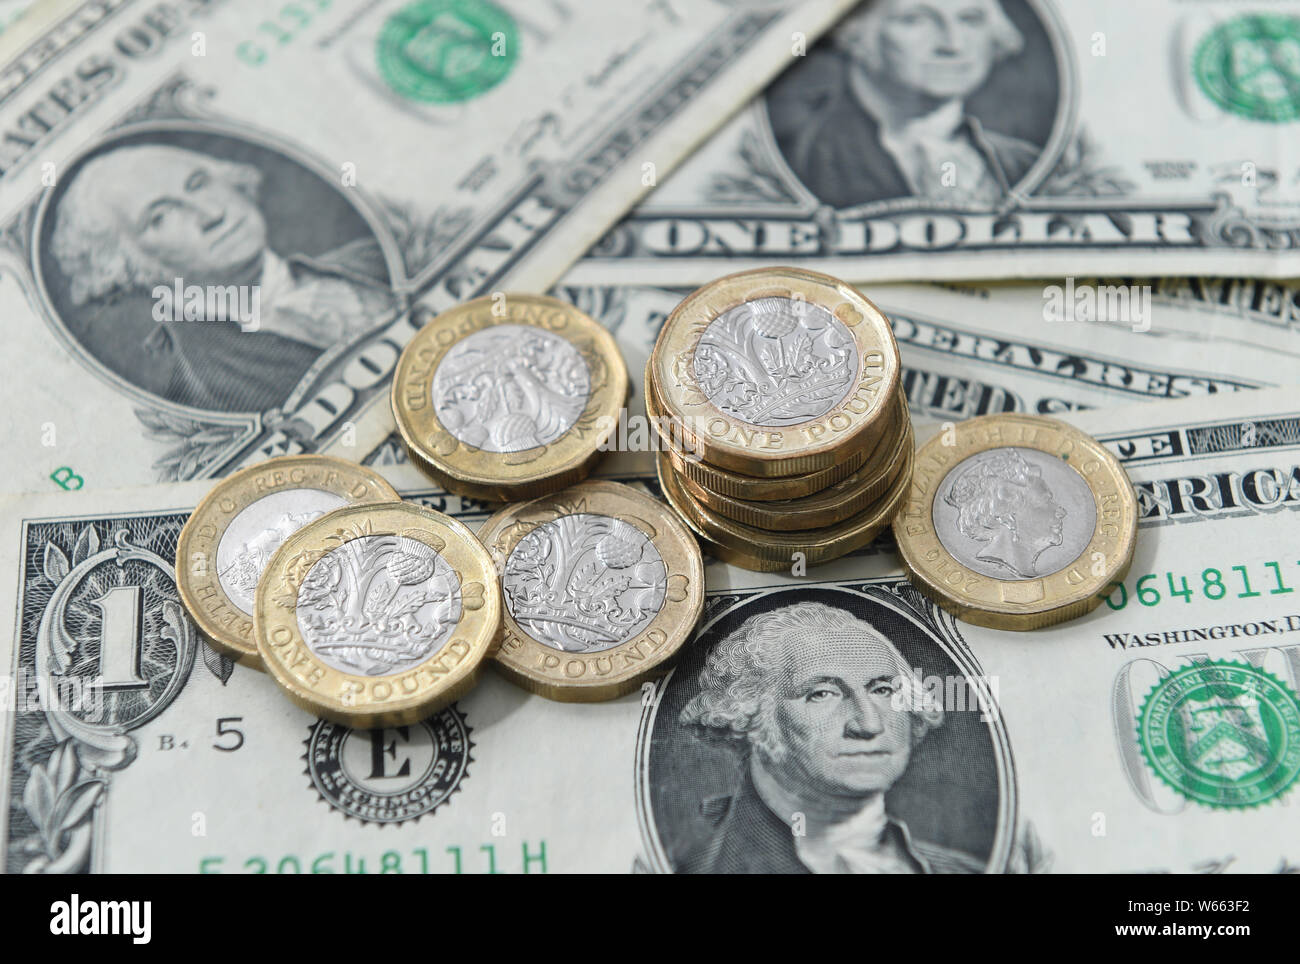 United States dollar bills and UK pound sterling coins. Stock Photo